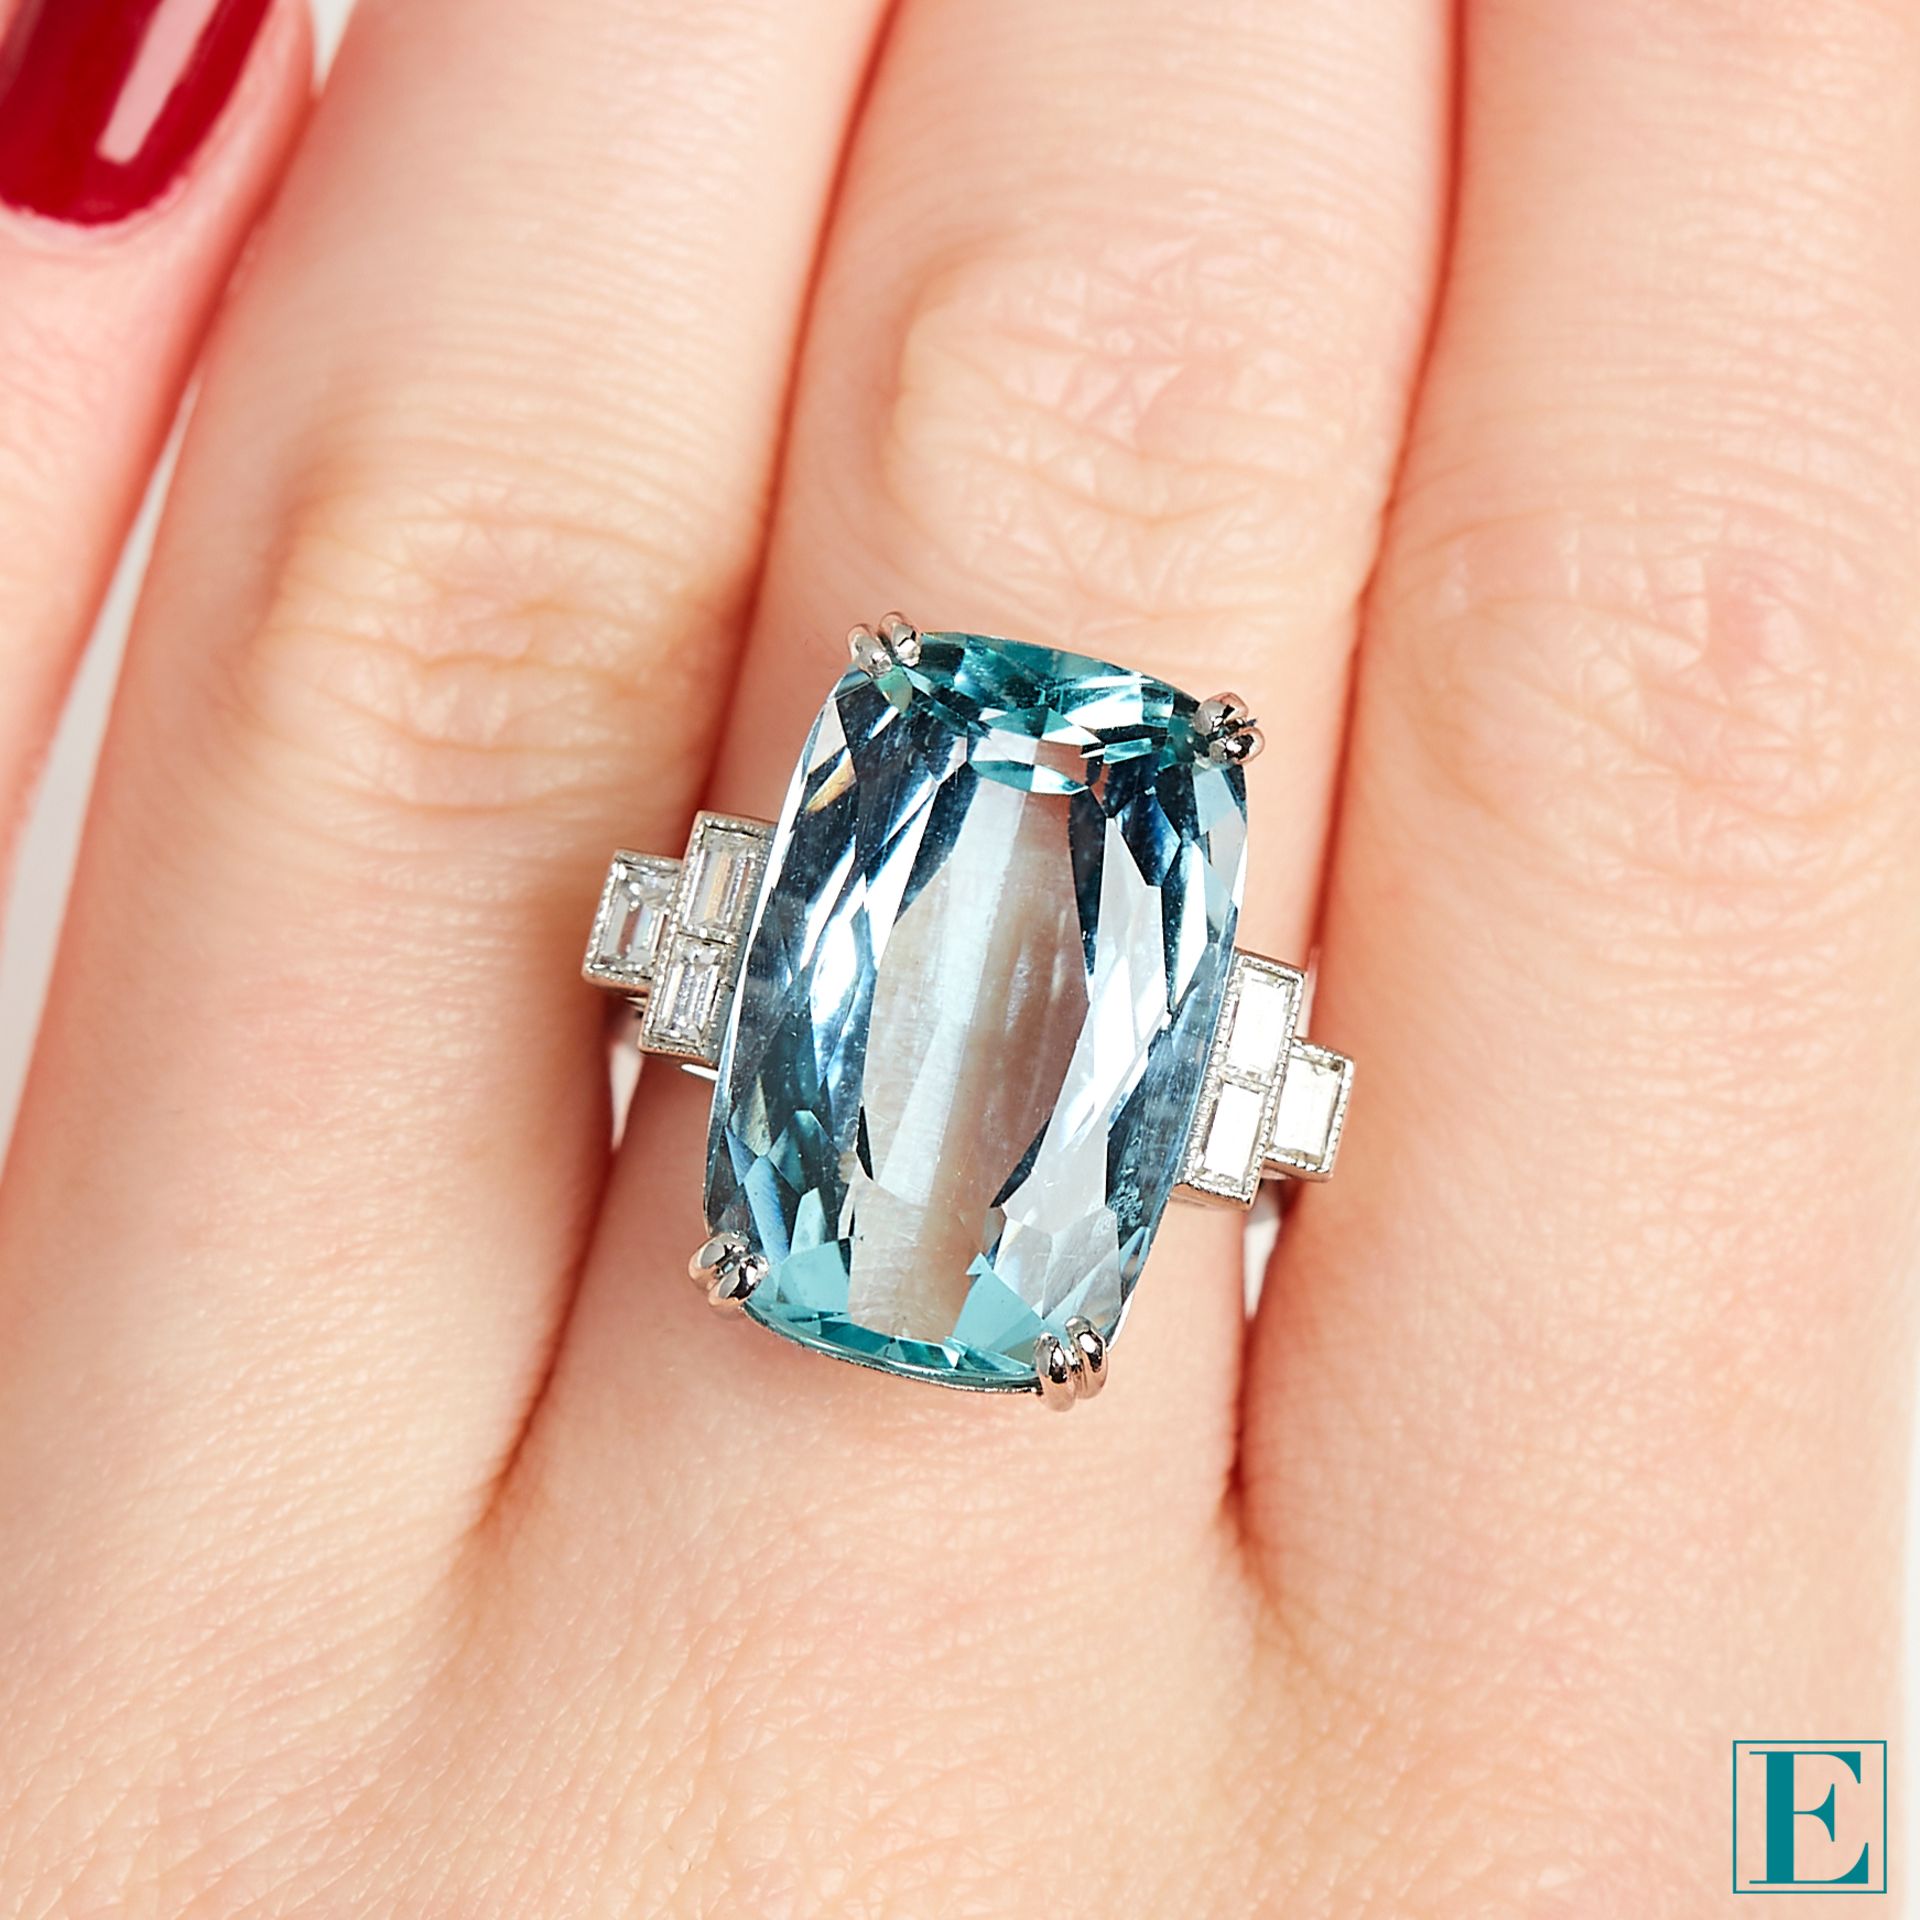 AQUAMARINE AND DIAMOND RING claw set with a cushion shaped aquamarine of 17.94 carats, accented by - Image 3 of 3